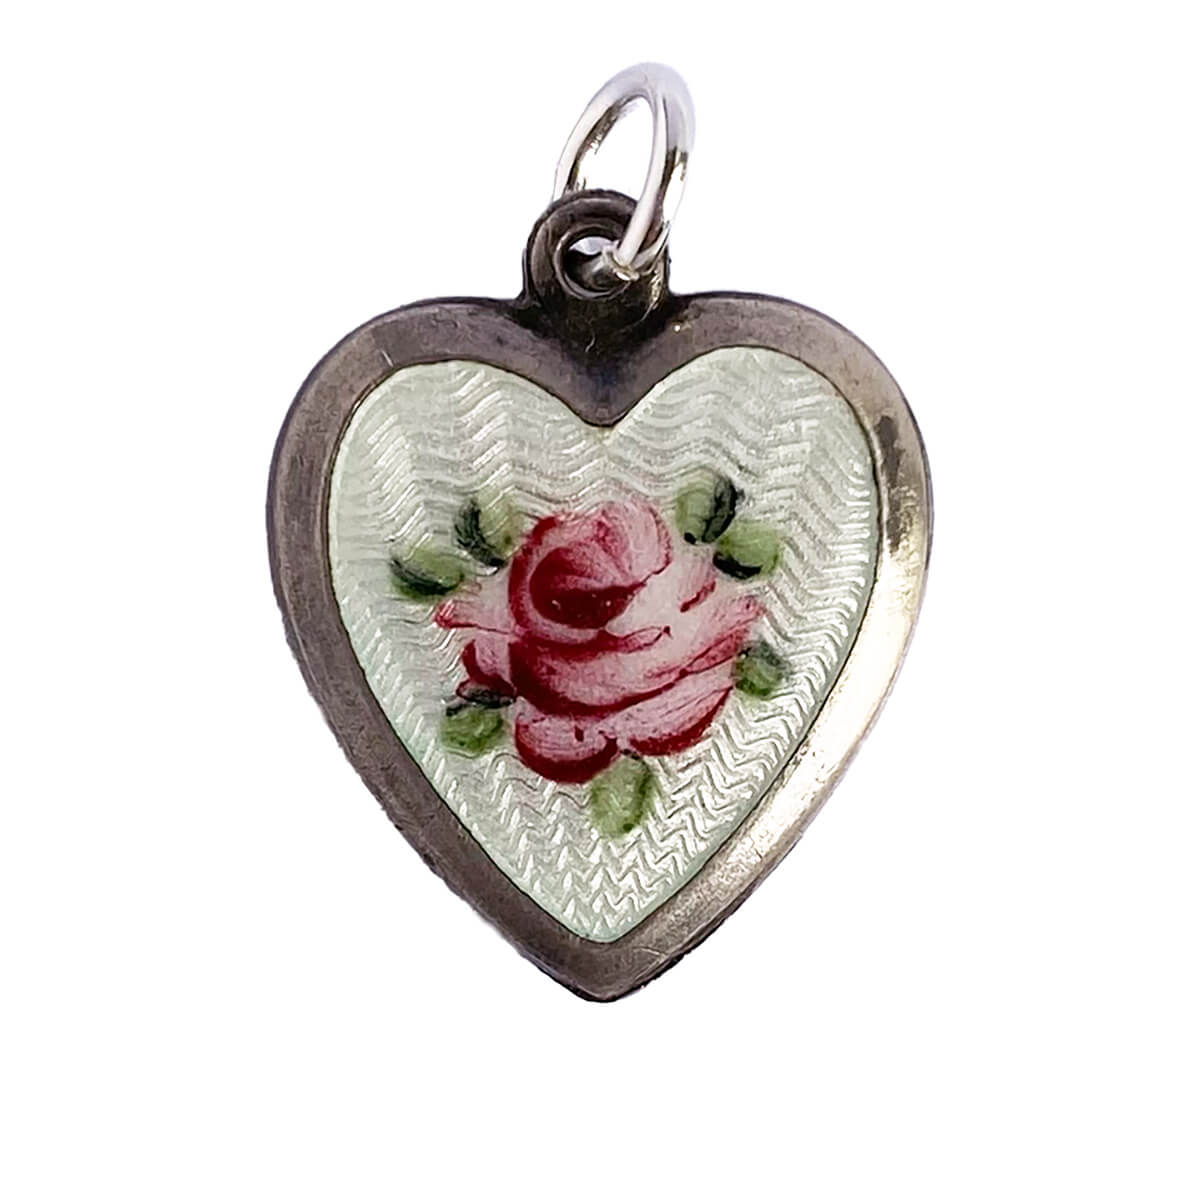 Vintage guilloche enamel puffed heart charm with pink rose flower